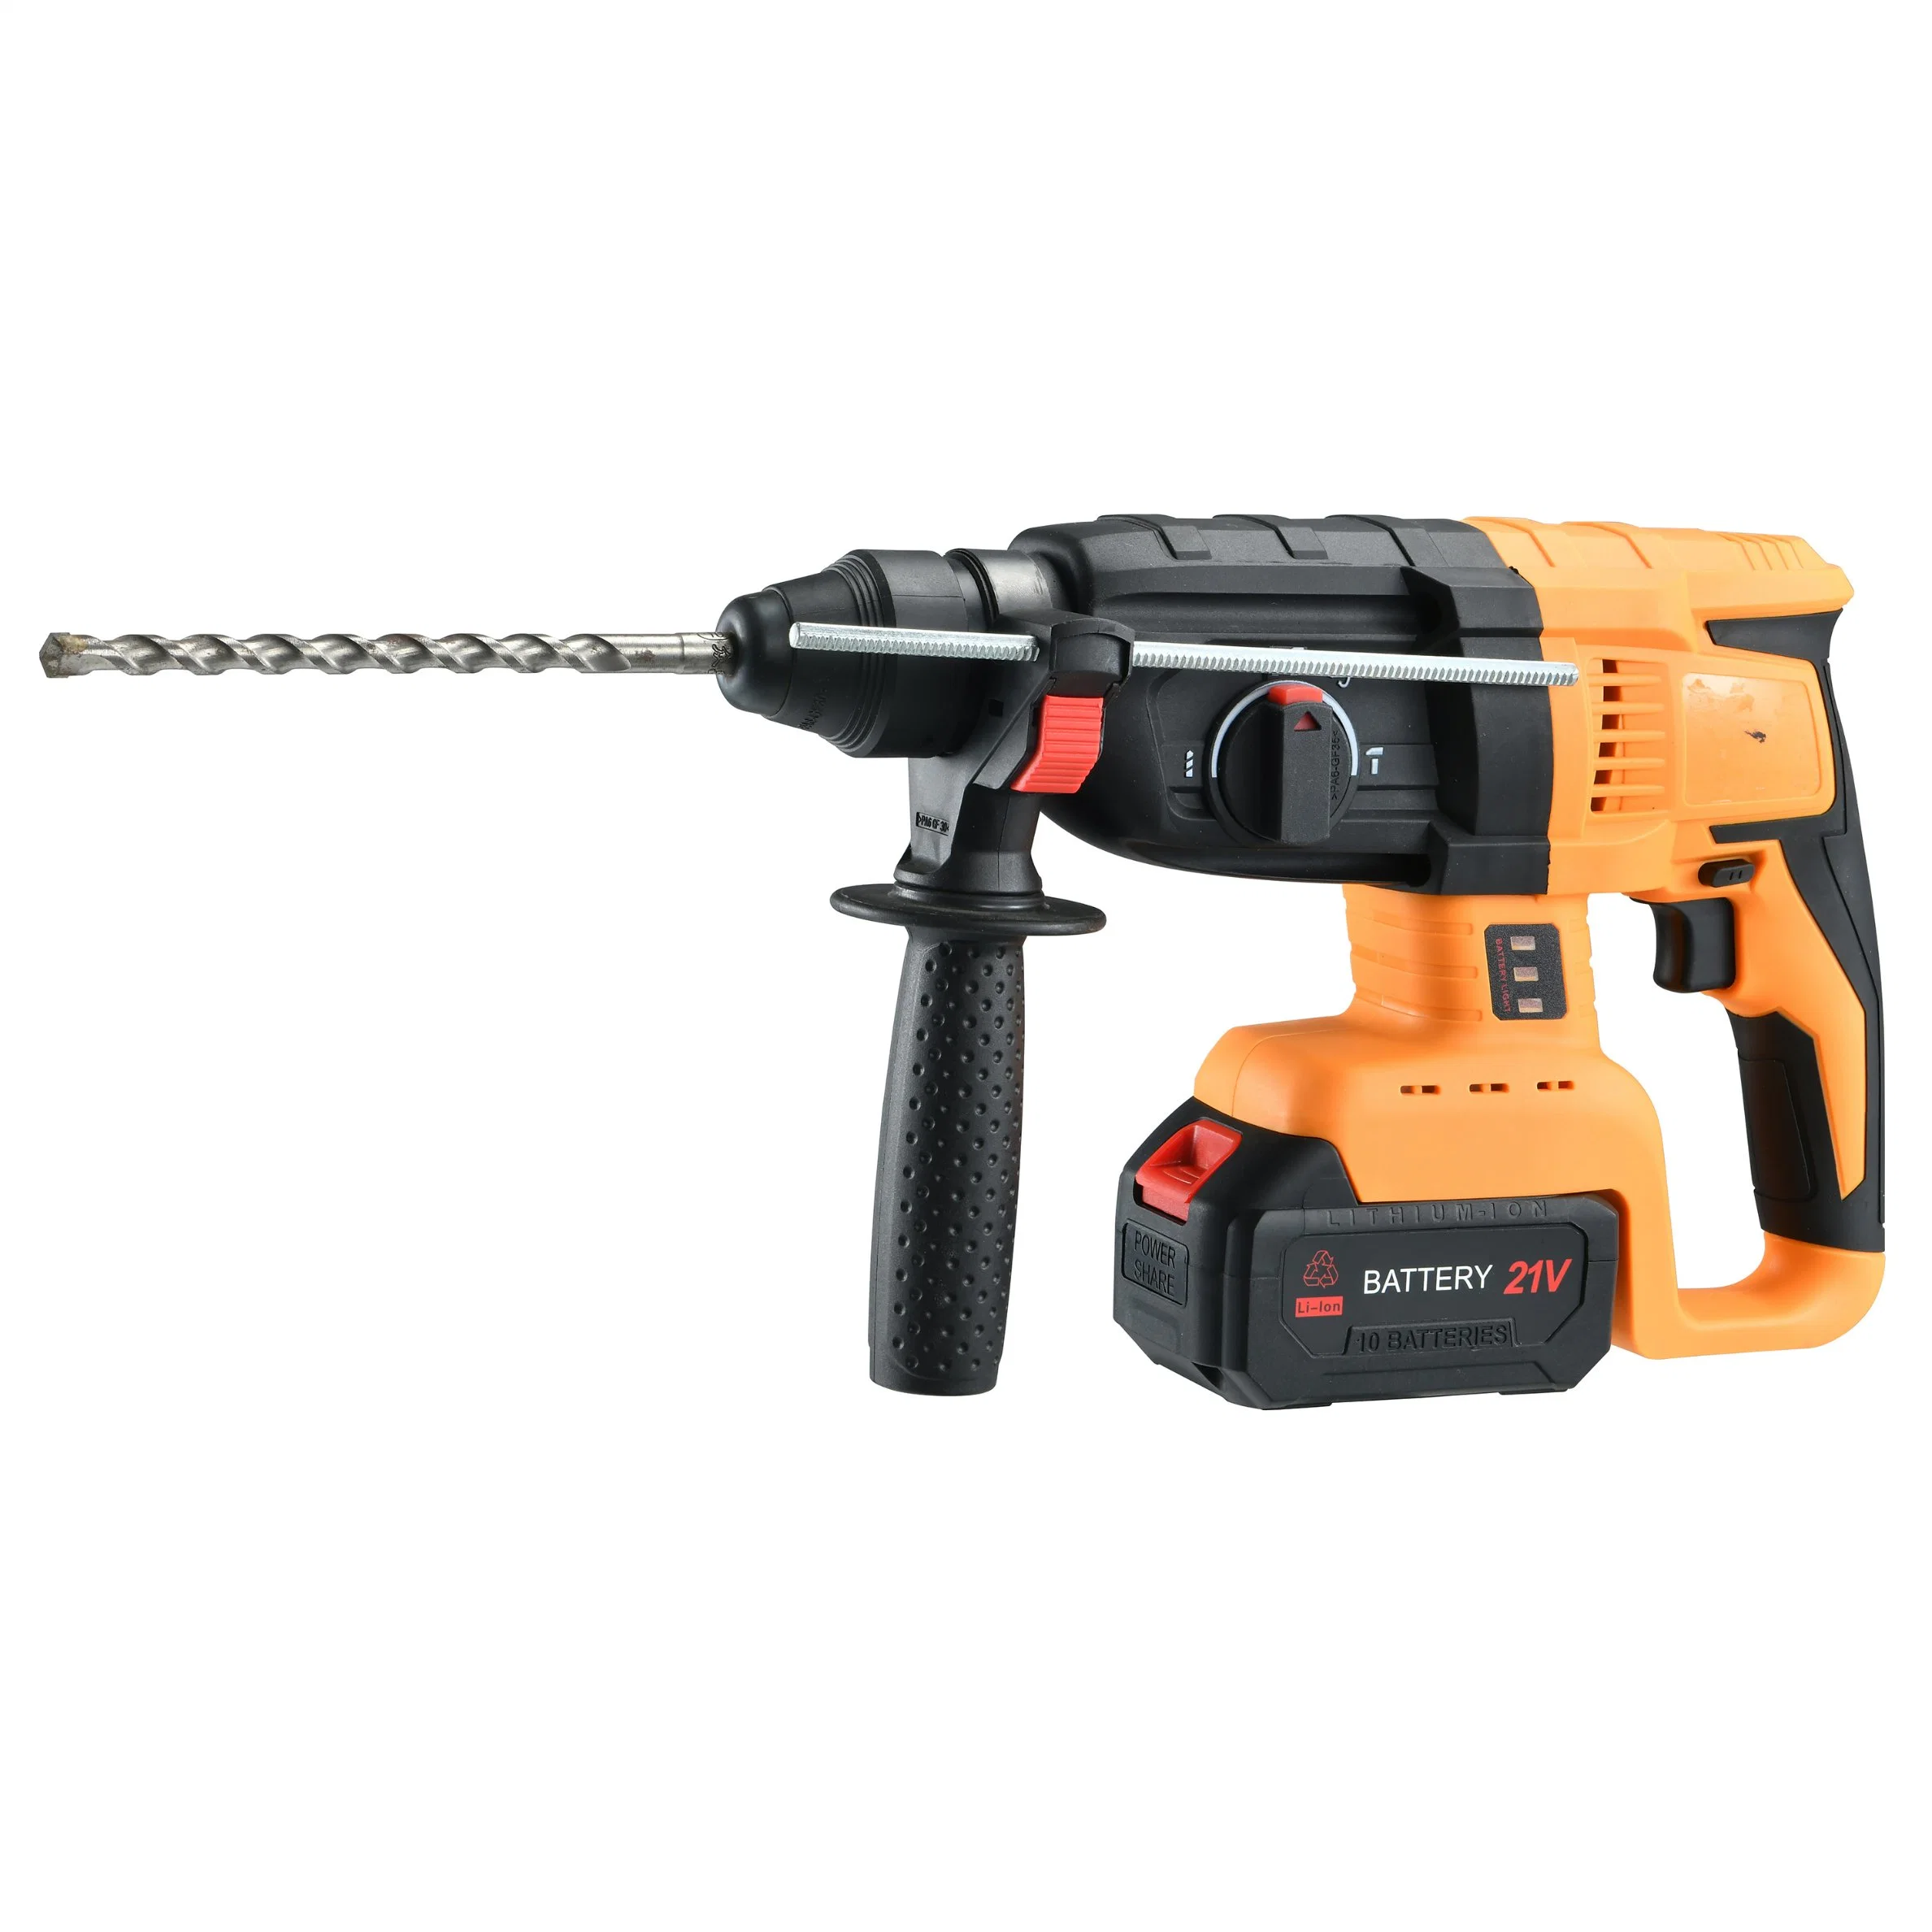 Electric Hammer Drill Power Tools Best 18V Battery Powered SDS Rotary Hammer